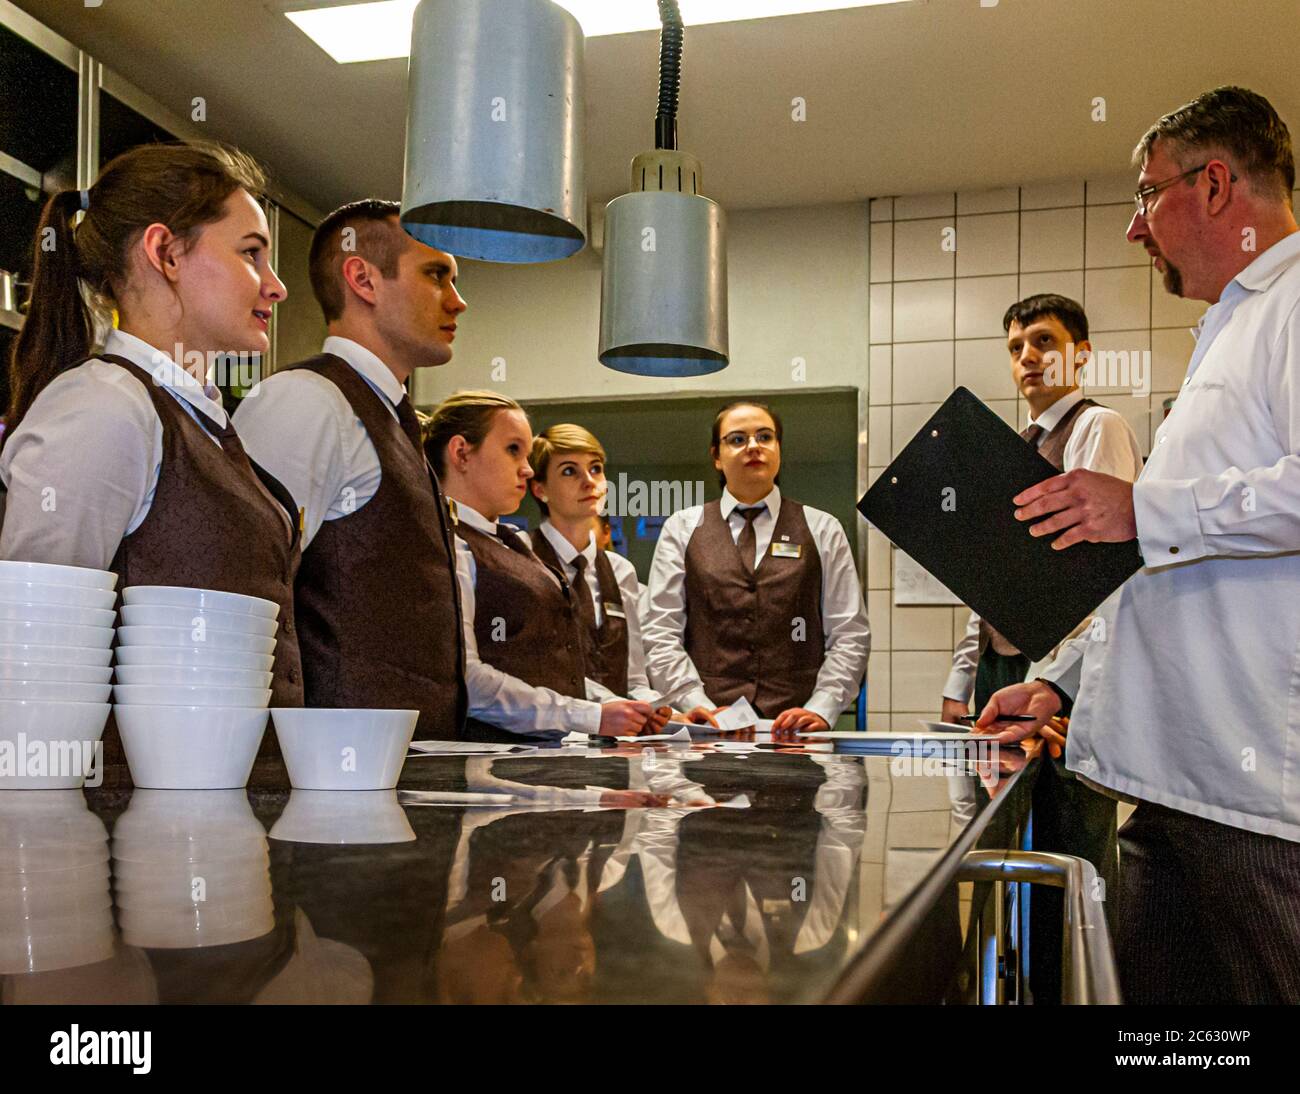 André Siegmann speaks to his service brigade before the guest appearance of the Michelin star chef Marco Müller in Sankt Peter-Ording, Germany Stock Photo